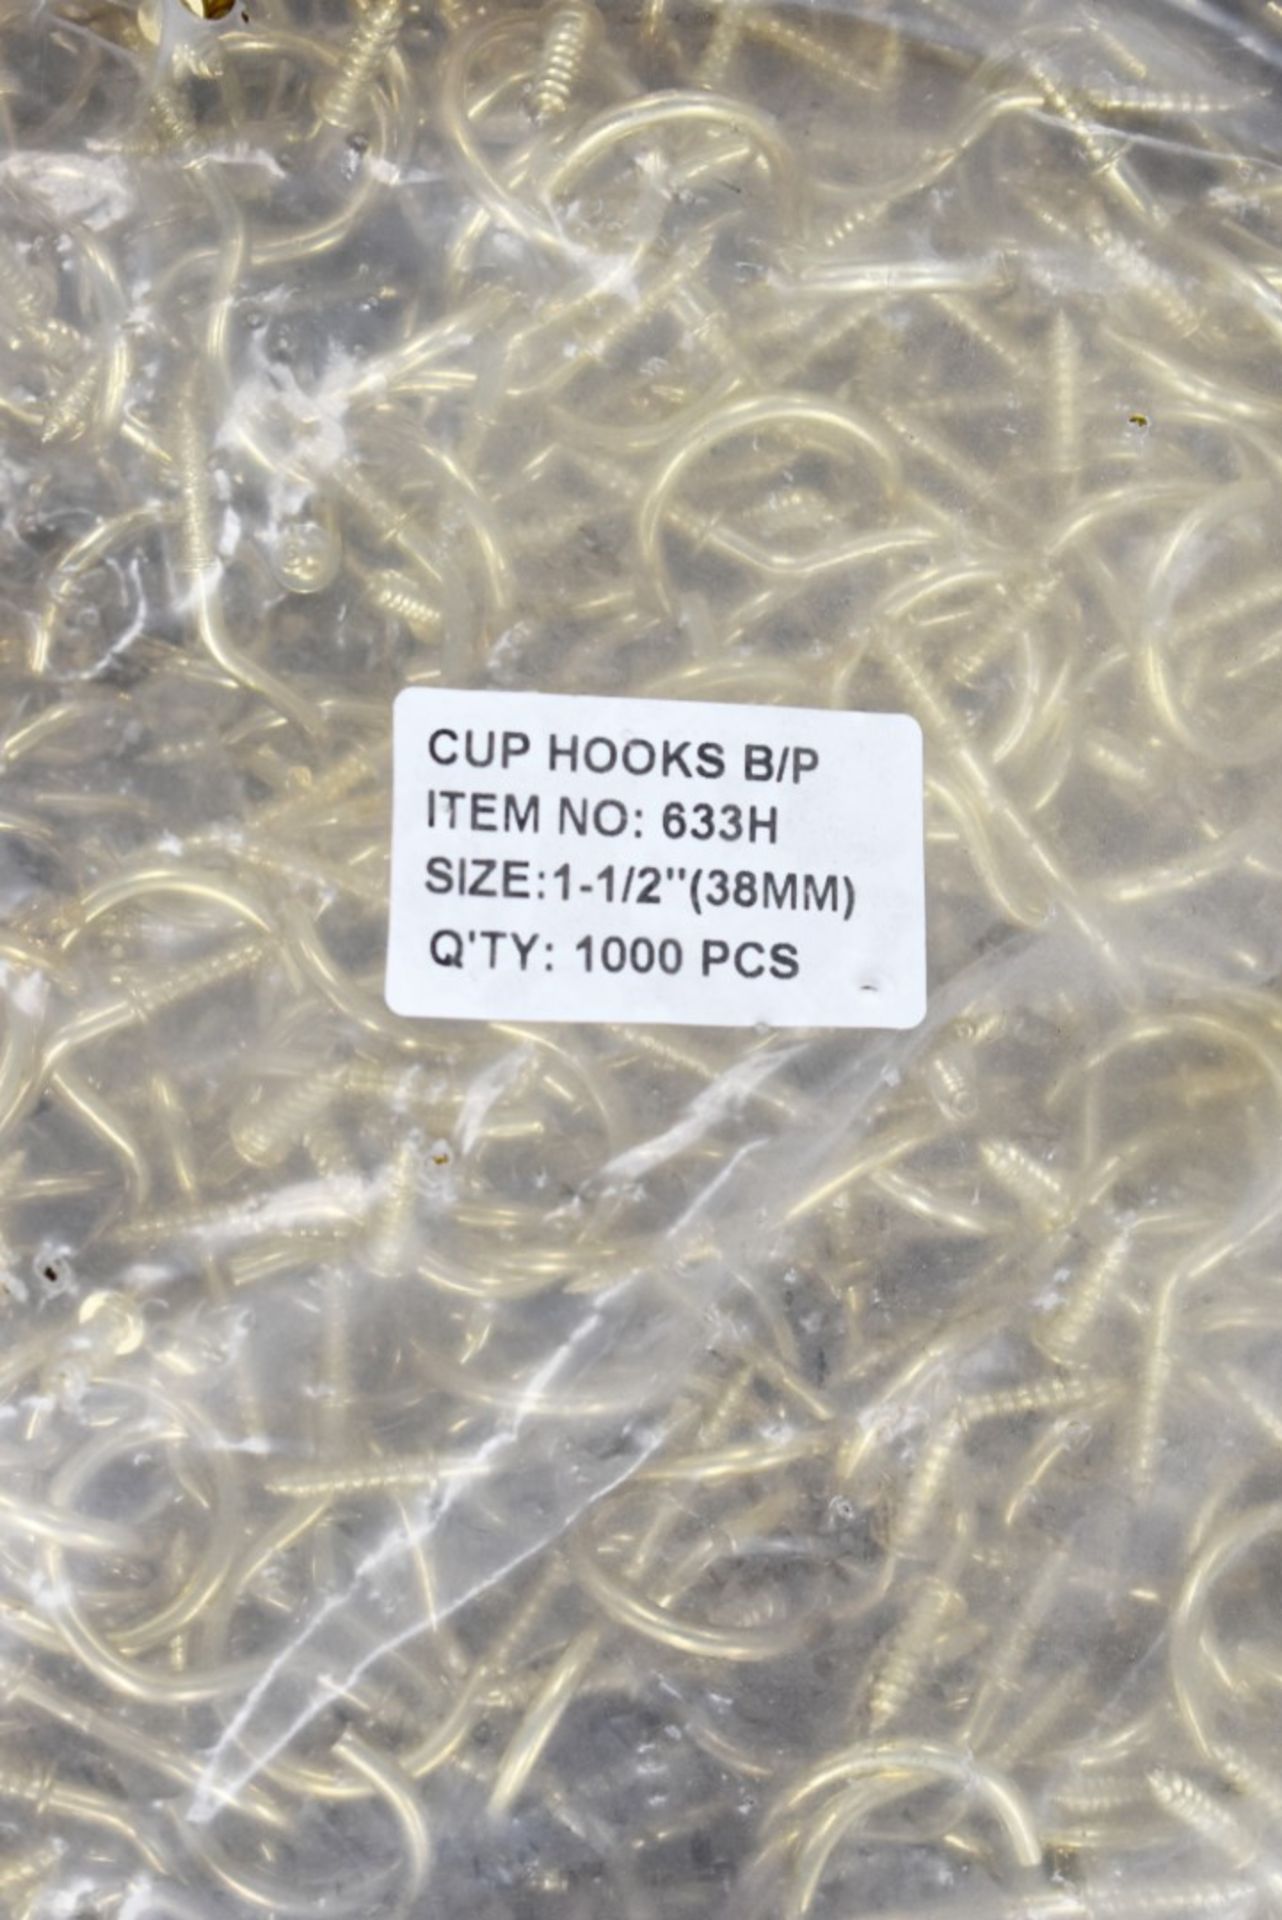 1,000 x Brass Plated Cup Screw Hooks - Product Code 633H - Size 1-1/2" 38mm - Supplied in 1 Bag of - Image 3 of 3